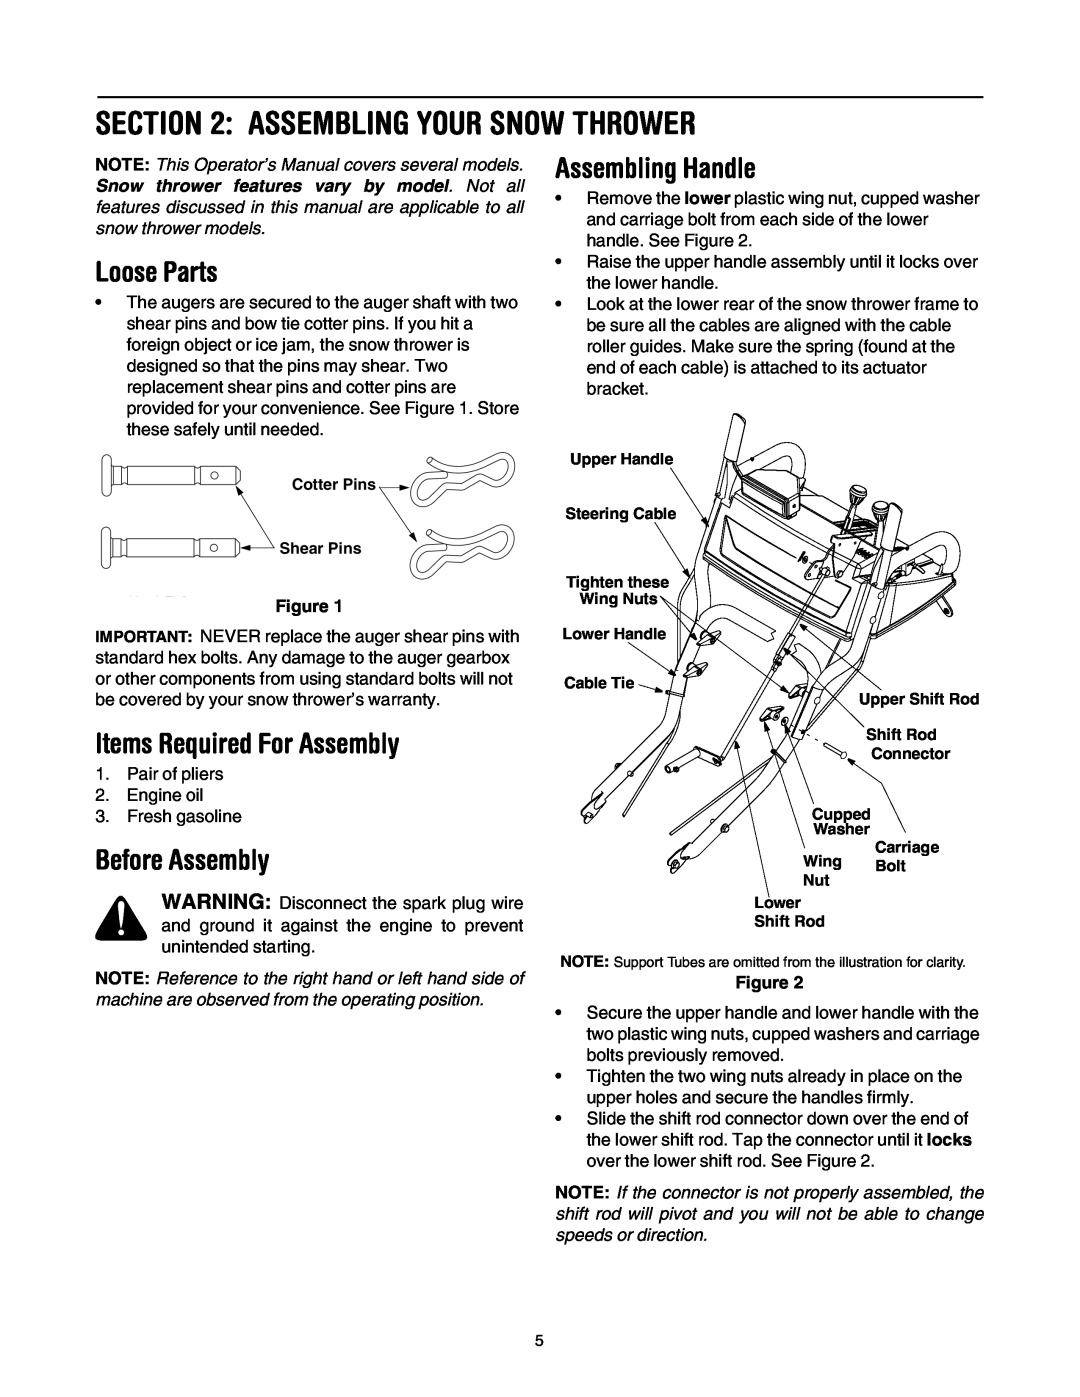 Yard-Man OGST-2806 manual Assembling Your Snow Thrower, Loose Parts, Items Required For Assembly, Before Assembly 